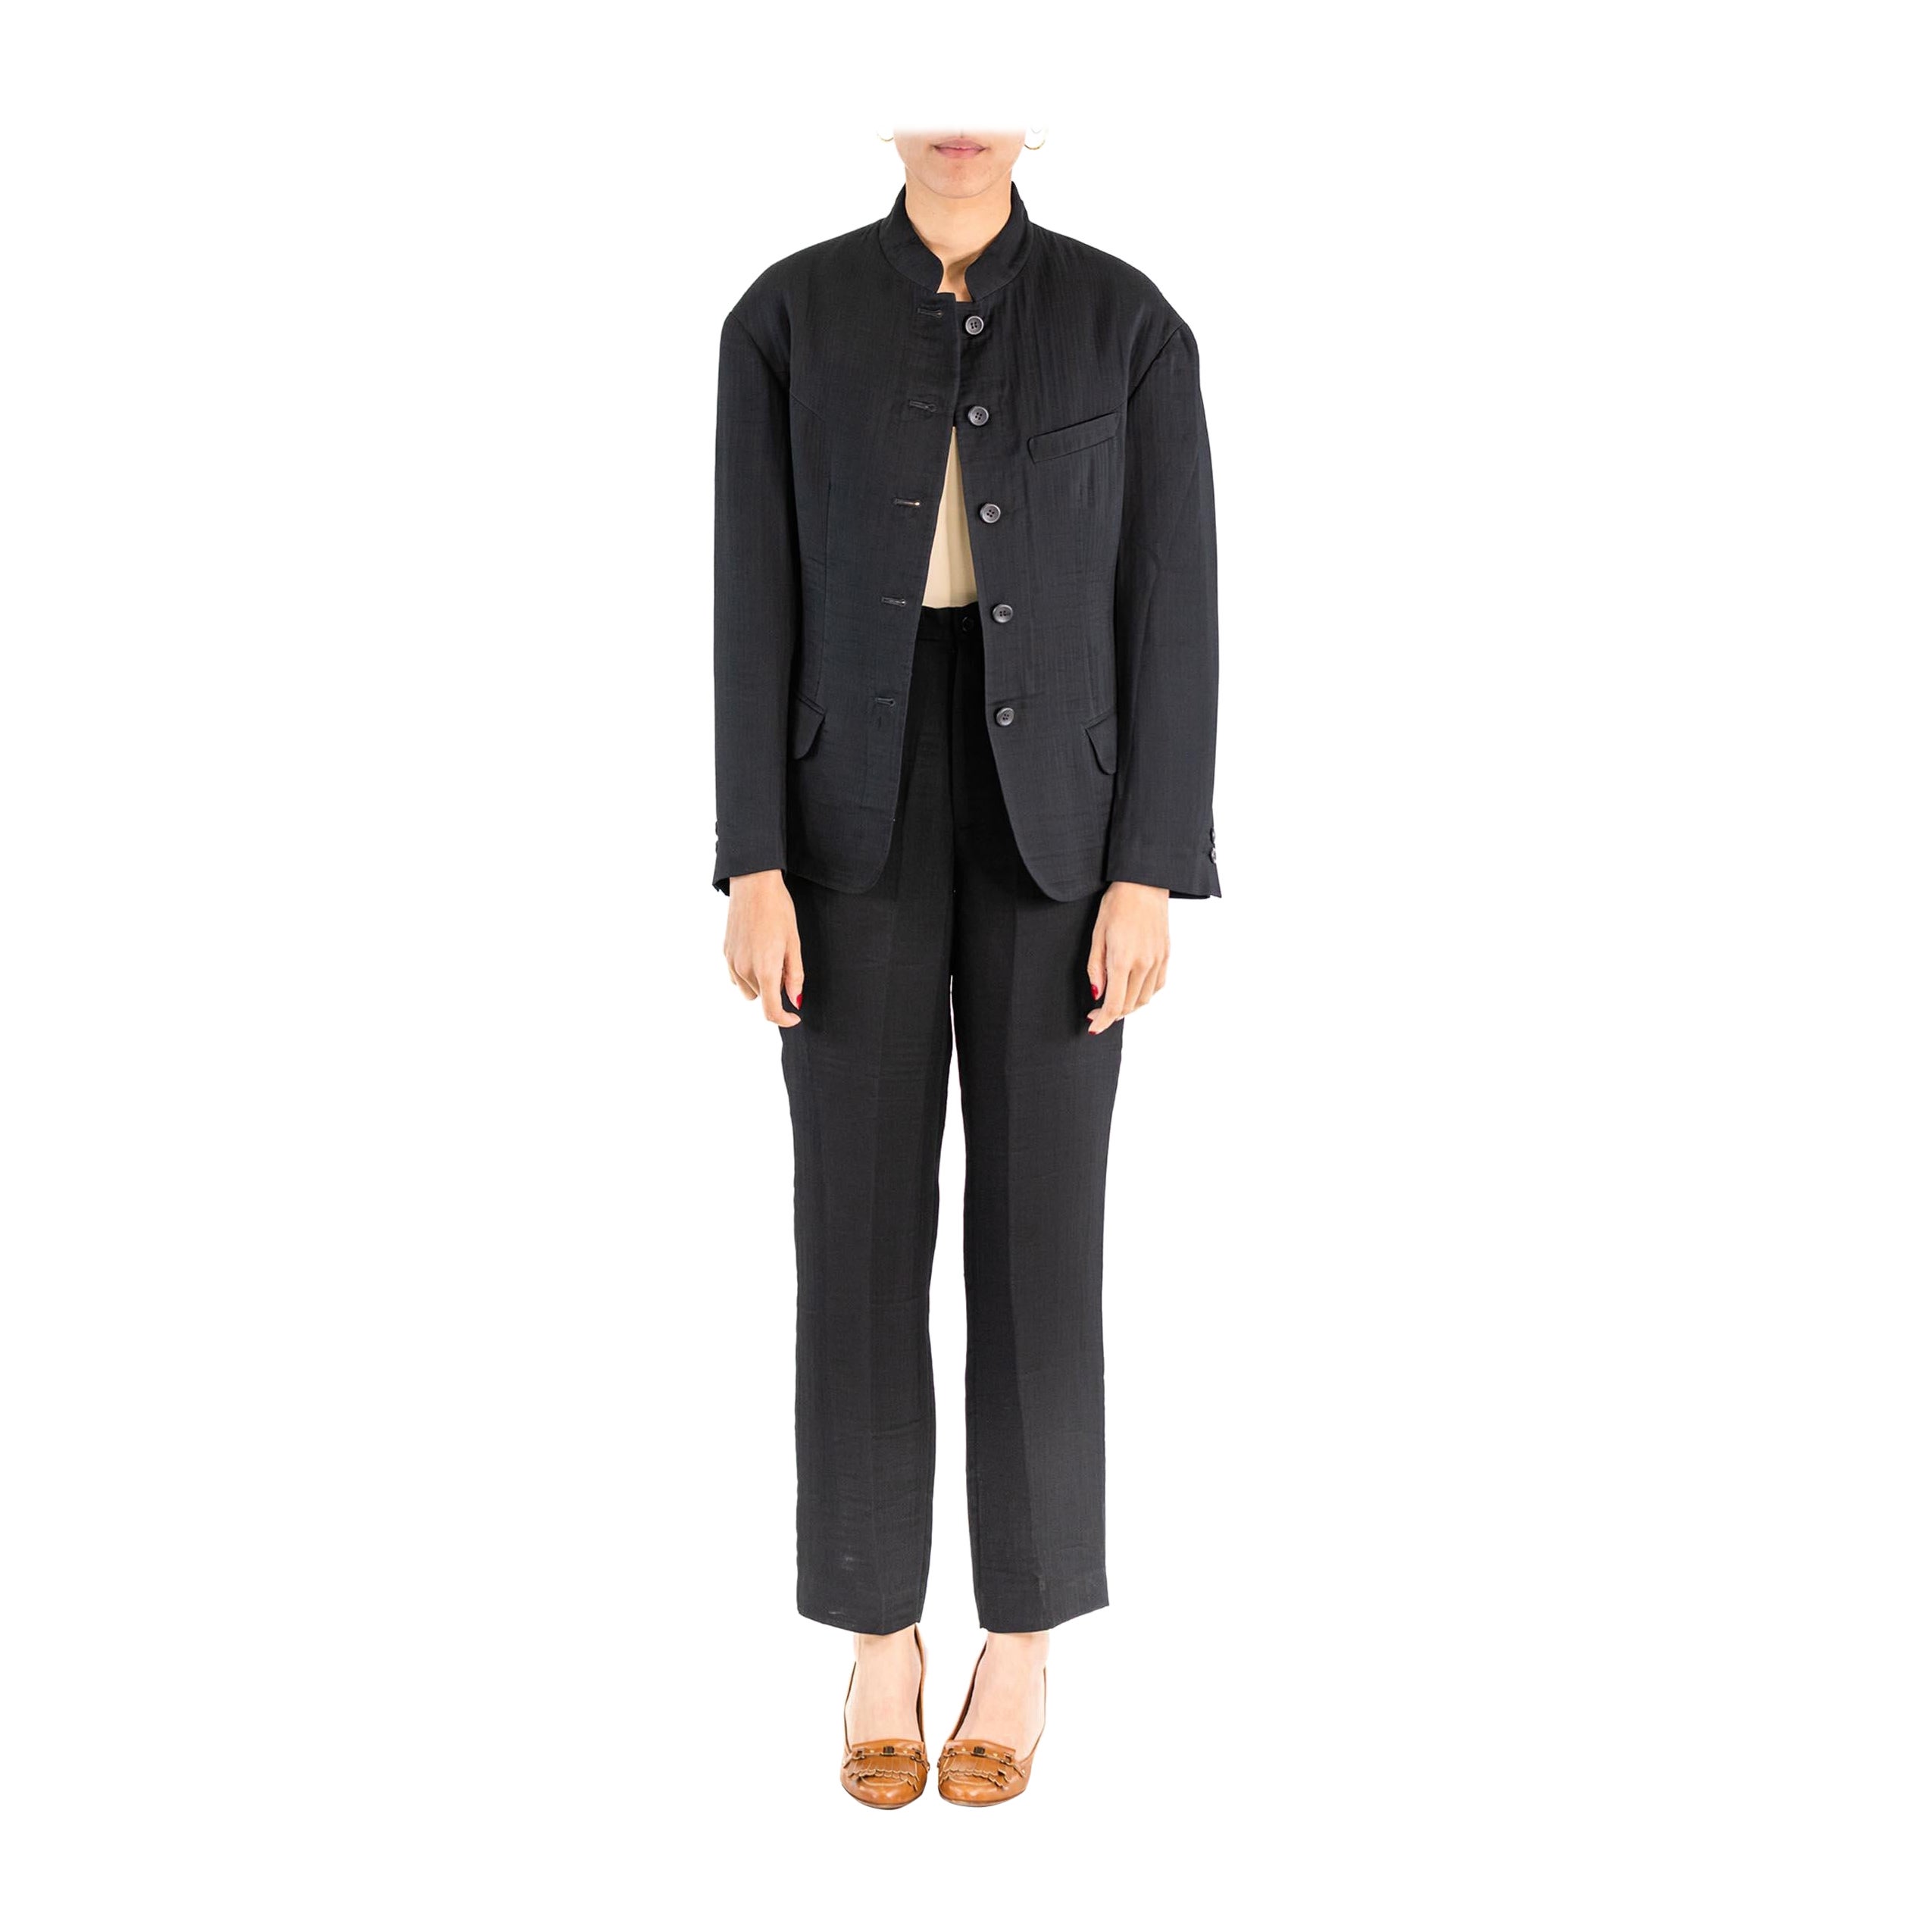 1990S ISSEY MIYAKE Black Rayon Blend Lightweight Pucker Double-Weave Pant Suit For Sale